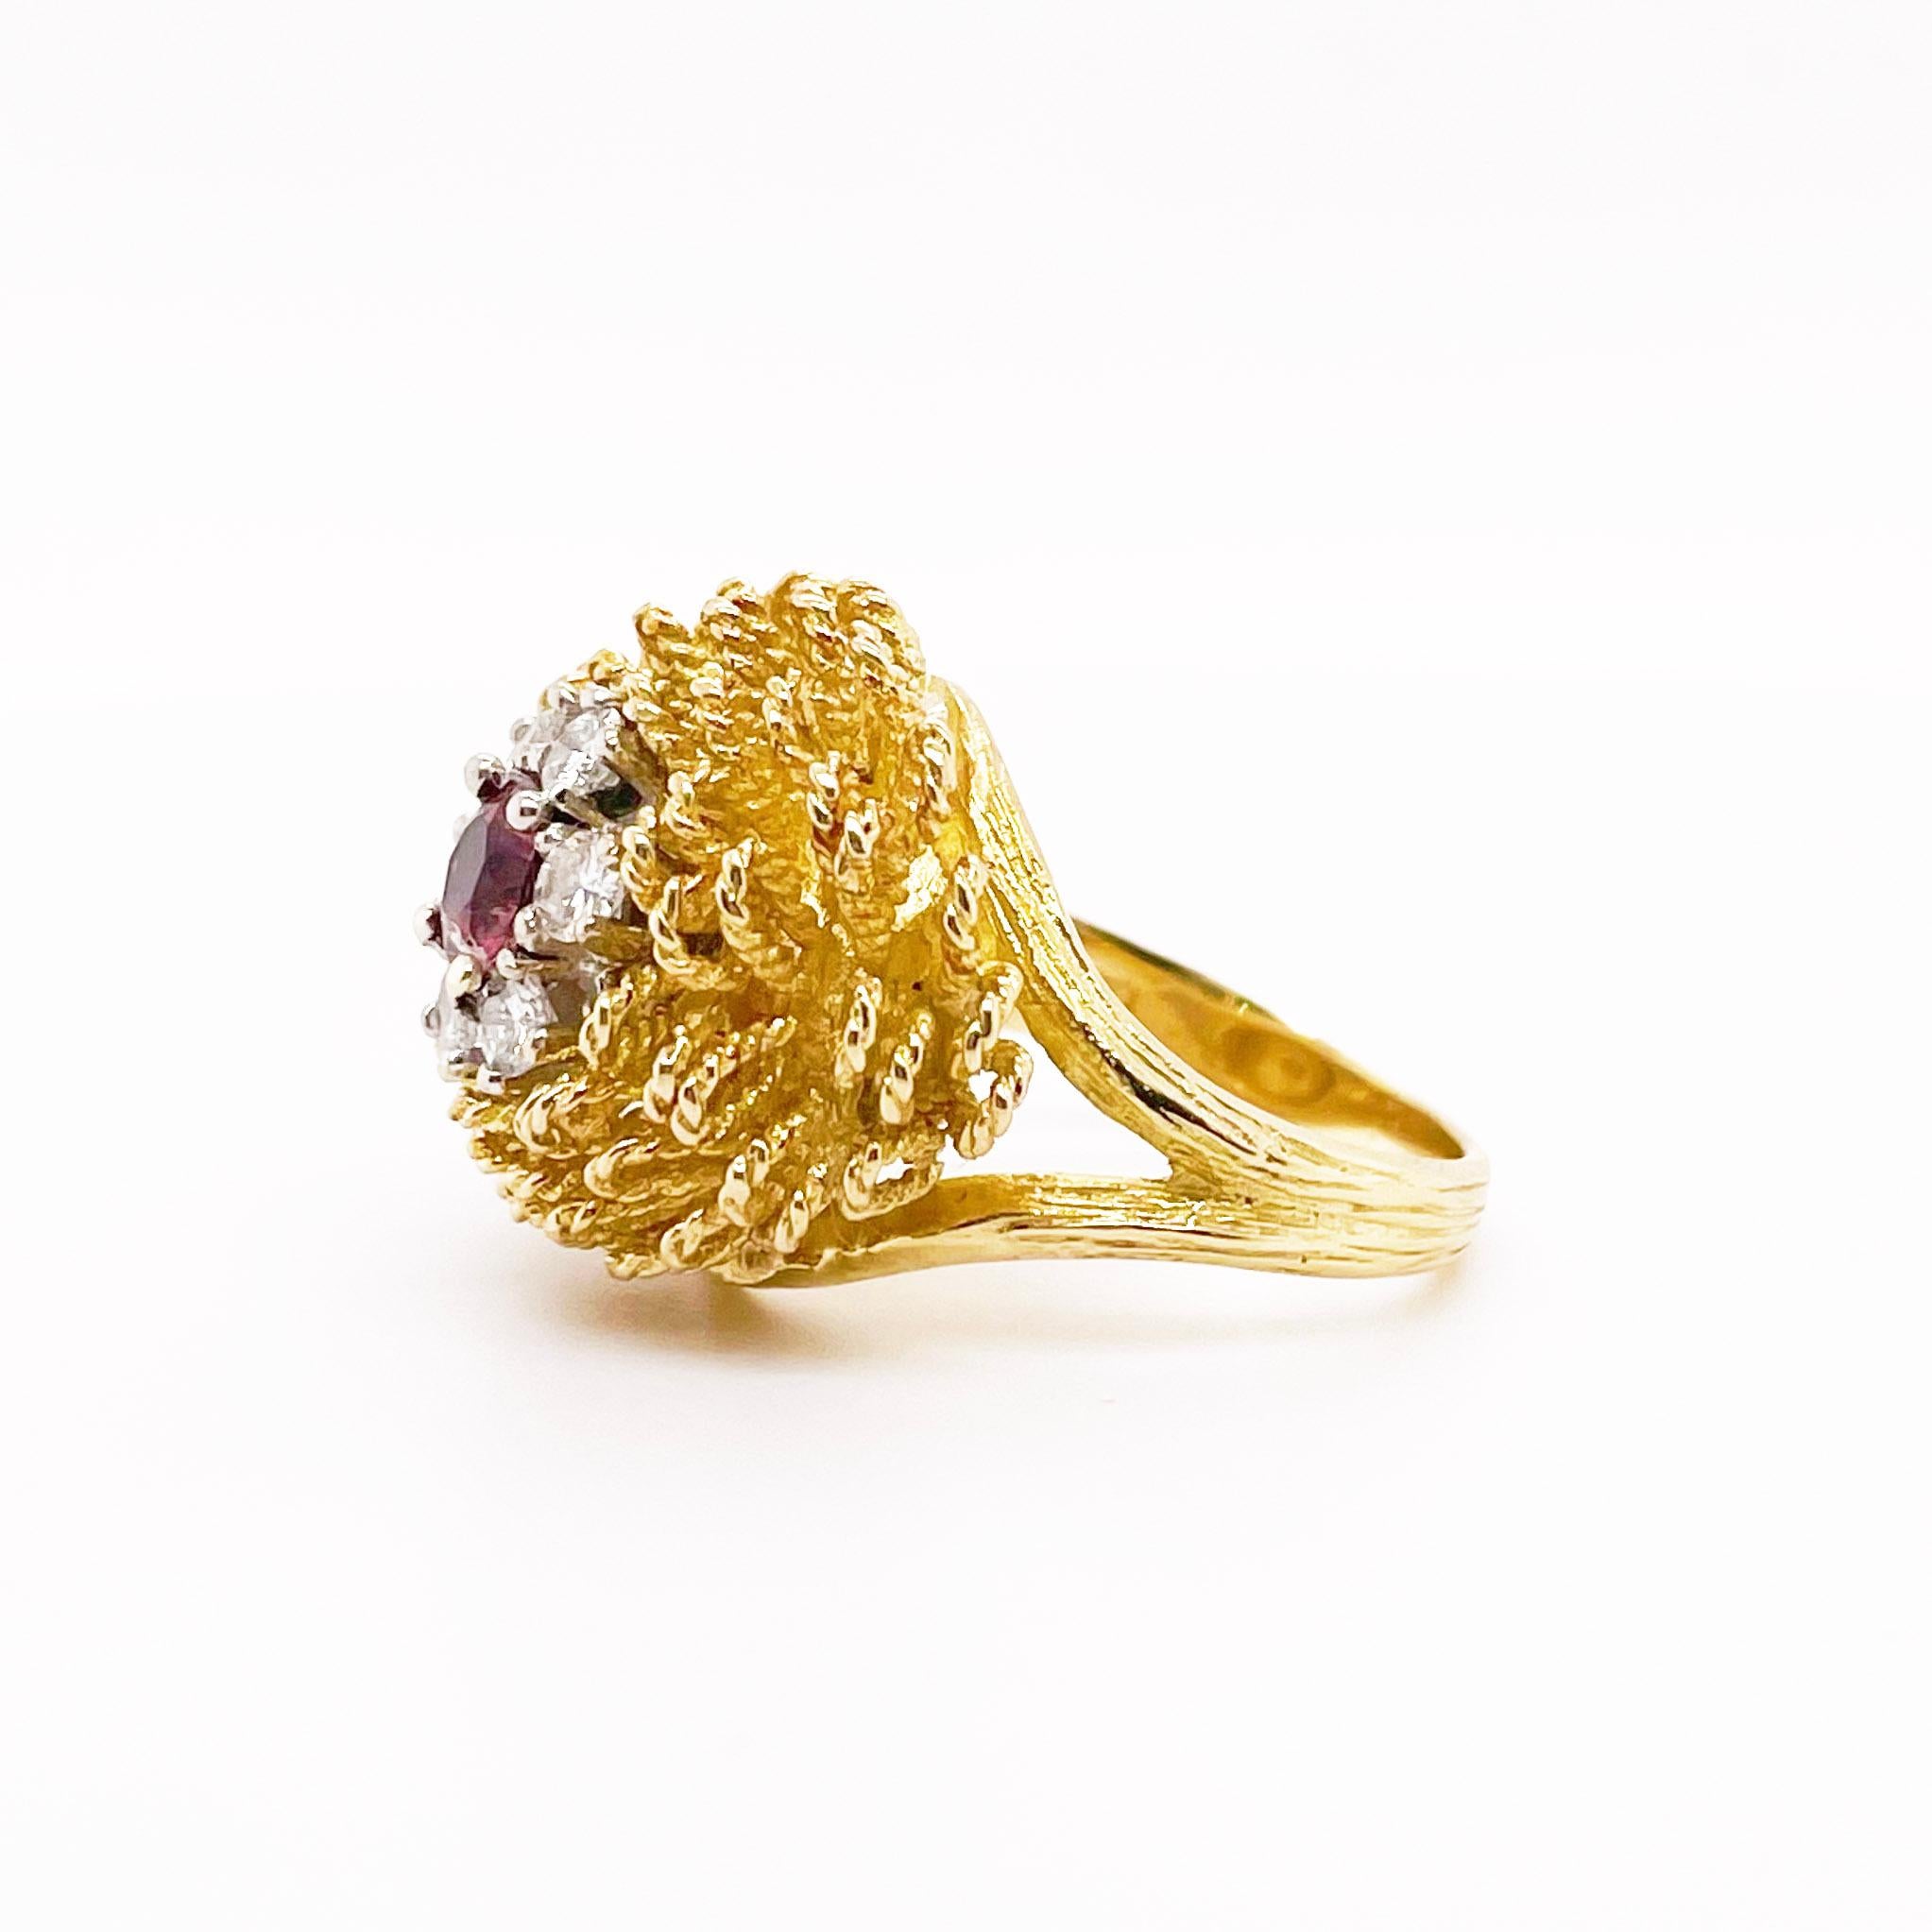 This Lilly ring is our favorite design of the season! It is domed in shape but has lots of texture and bling! The twisted rope petals makes for a perfect flower with six diamonds surrounding a pinkish tourmaline! This ring is very high quality with